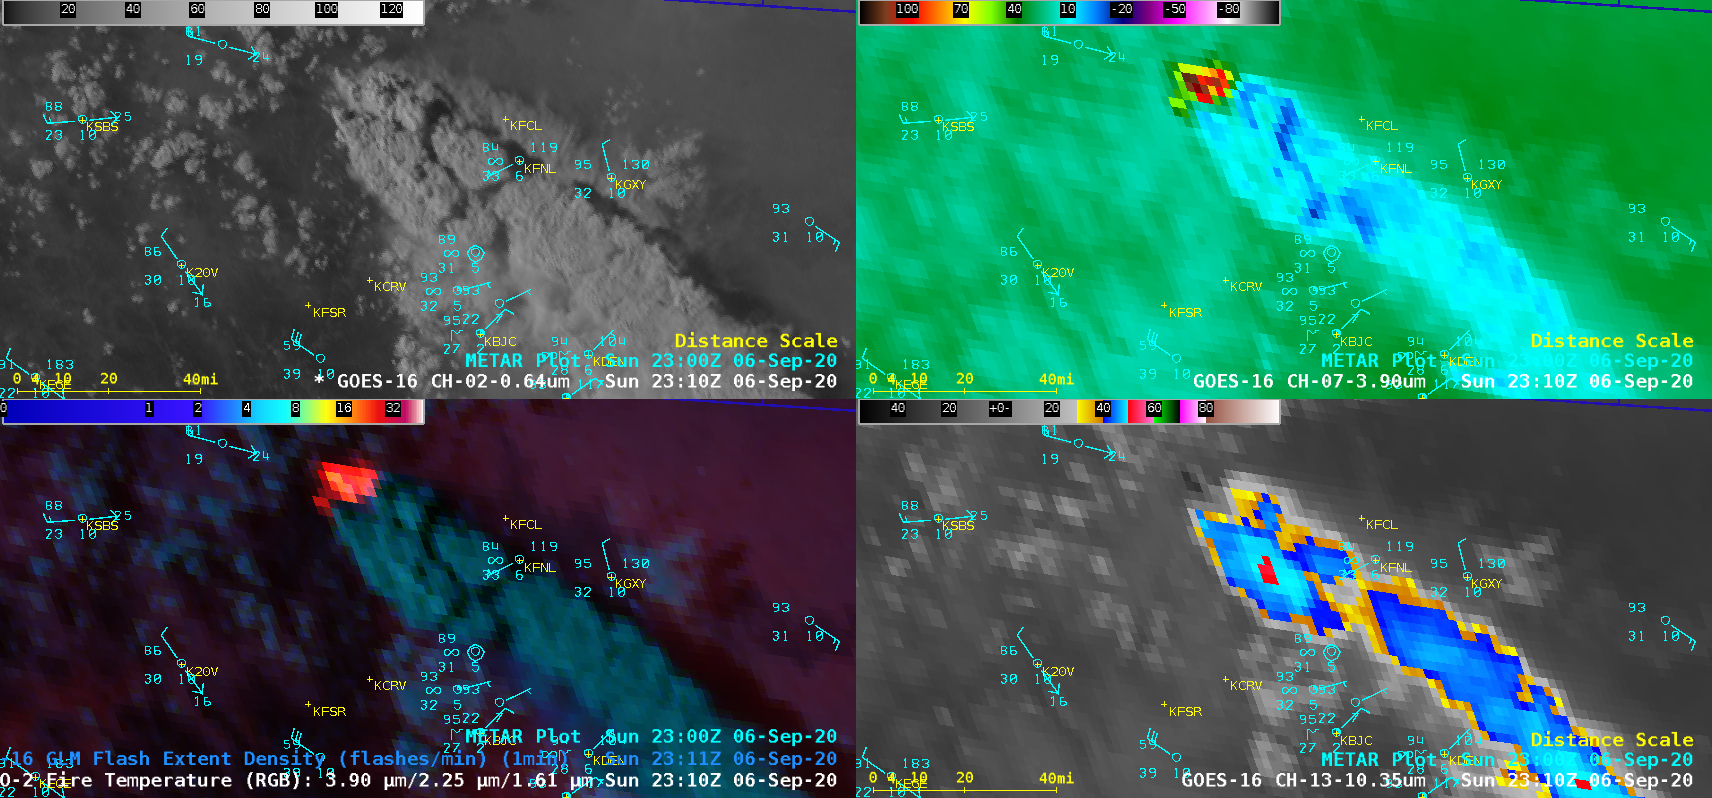 GOES-16 “Red” Visible (0.64 µm, top left), Shortwave Infrared (3.9 µm, top right), Fire Temperature RGB + GLM Flash Extent Density (bottom left) and “Clean” Infrared Window (10.35 µm, bottom right) [click to play animation | MP4]